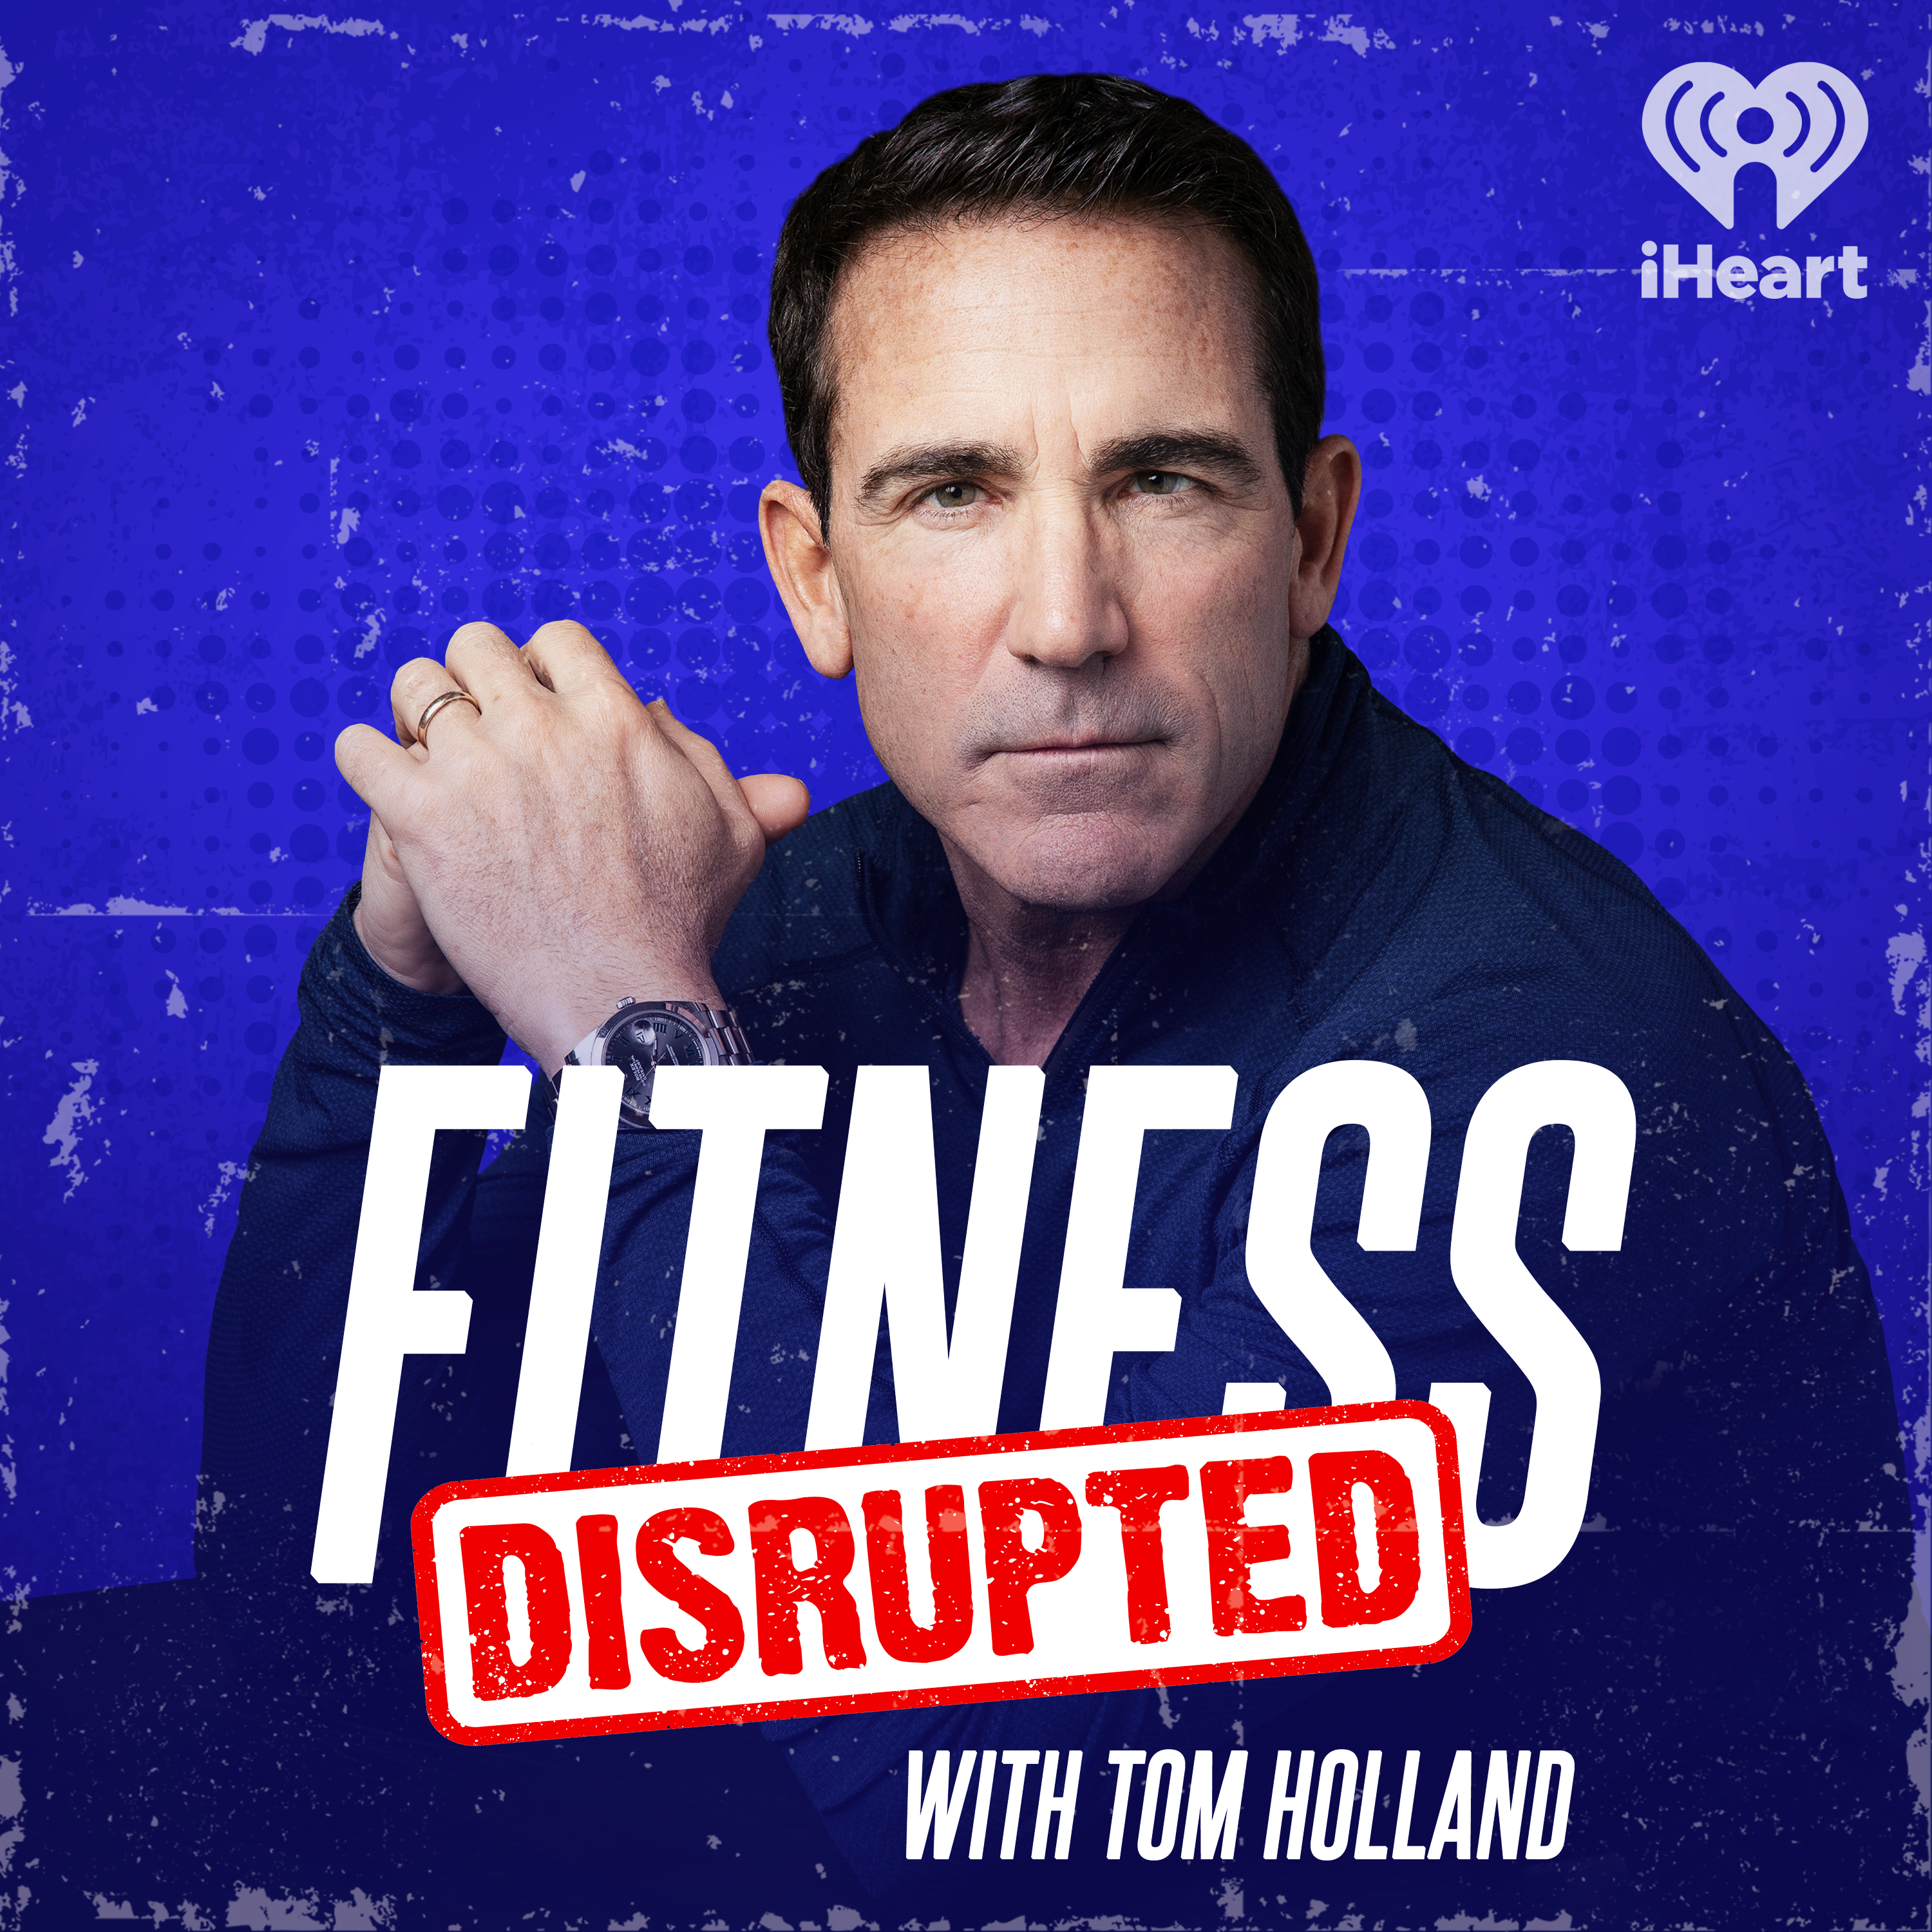 Introducing: Fitness Disrupted with Tom Holland